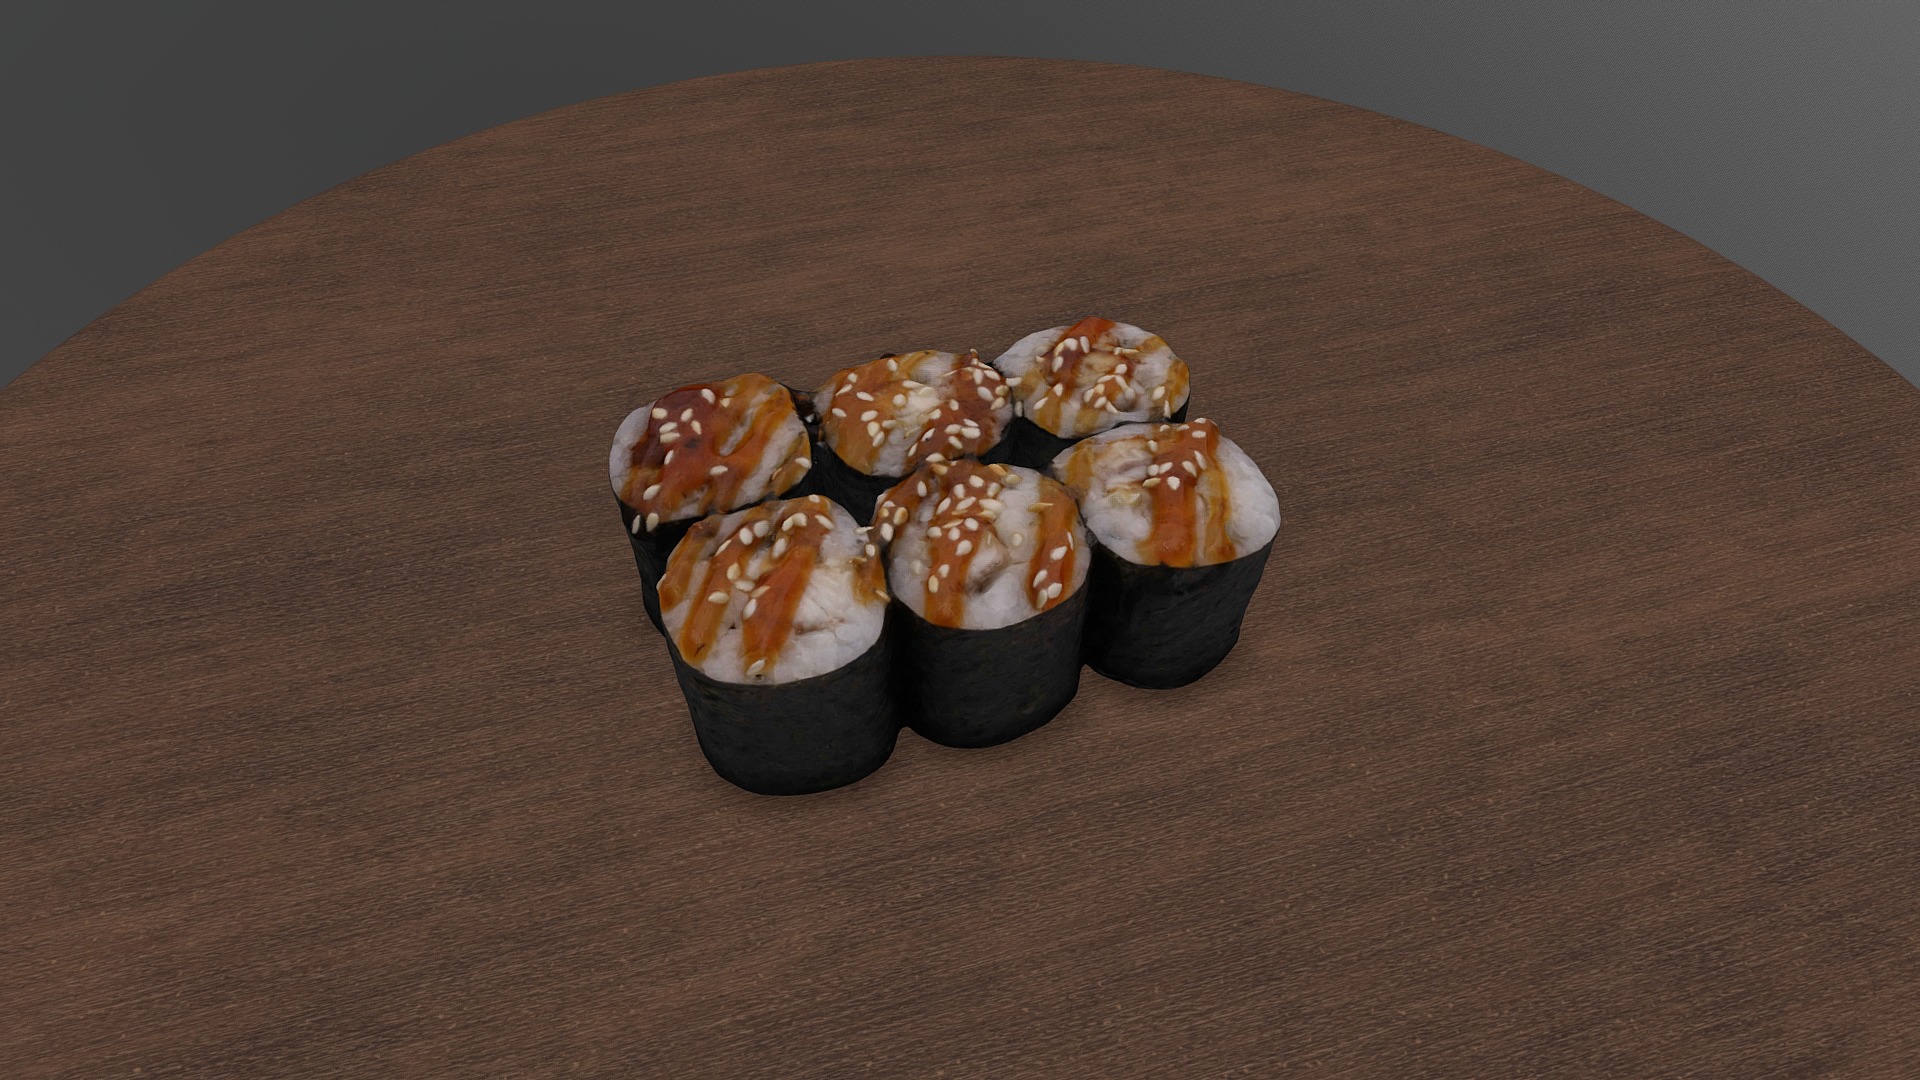 3D model 20Crabs - This is a 3D model of the 20Crabs. The 3D model is about a group of cupcakes with sprinkles on a wood surface.